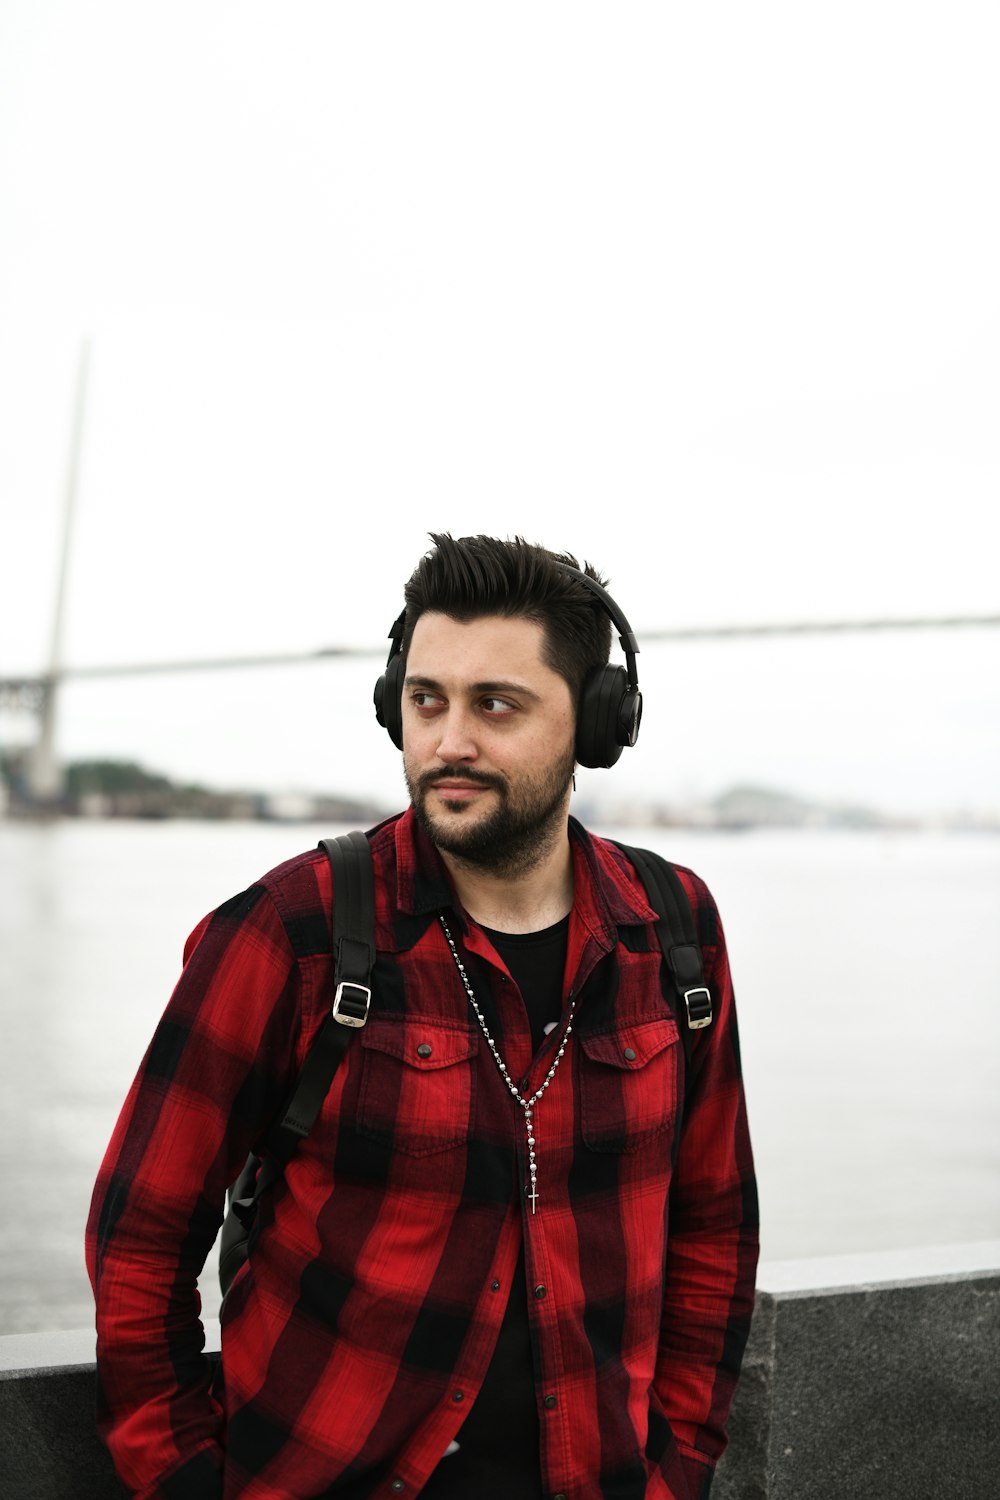 man in red and black plaid button up shirt standing near body of water during daytime